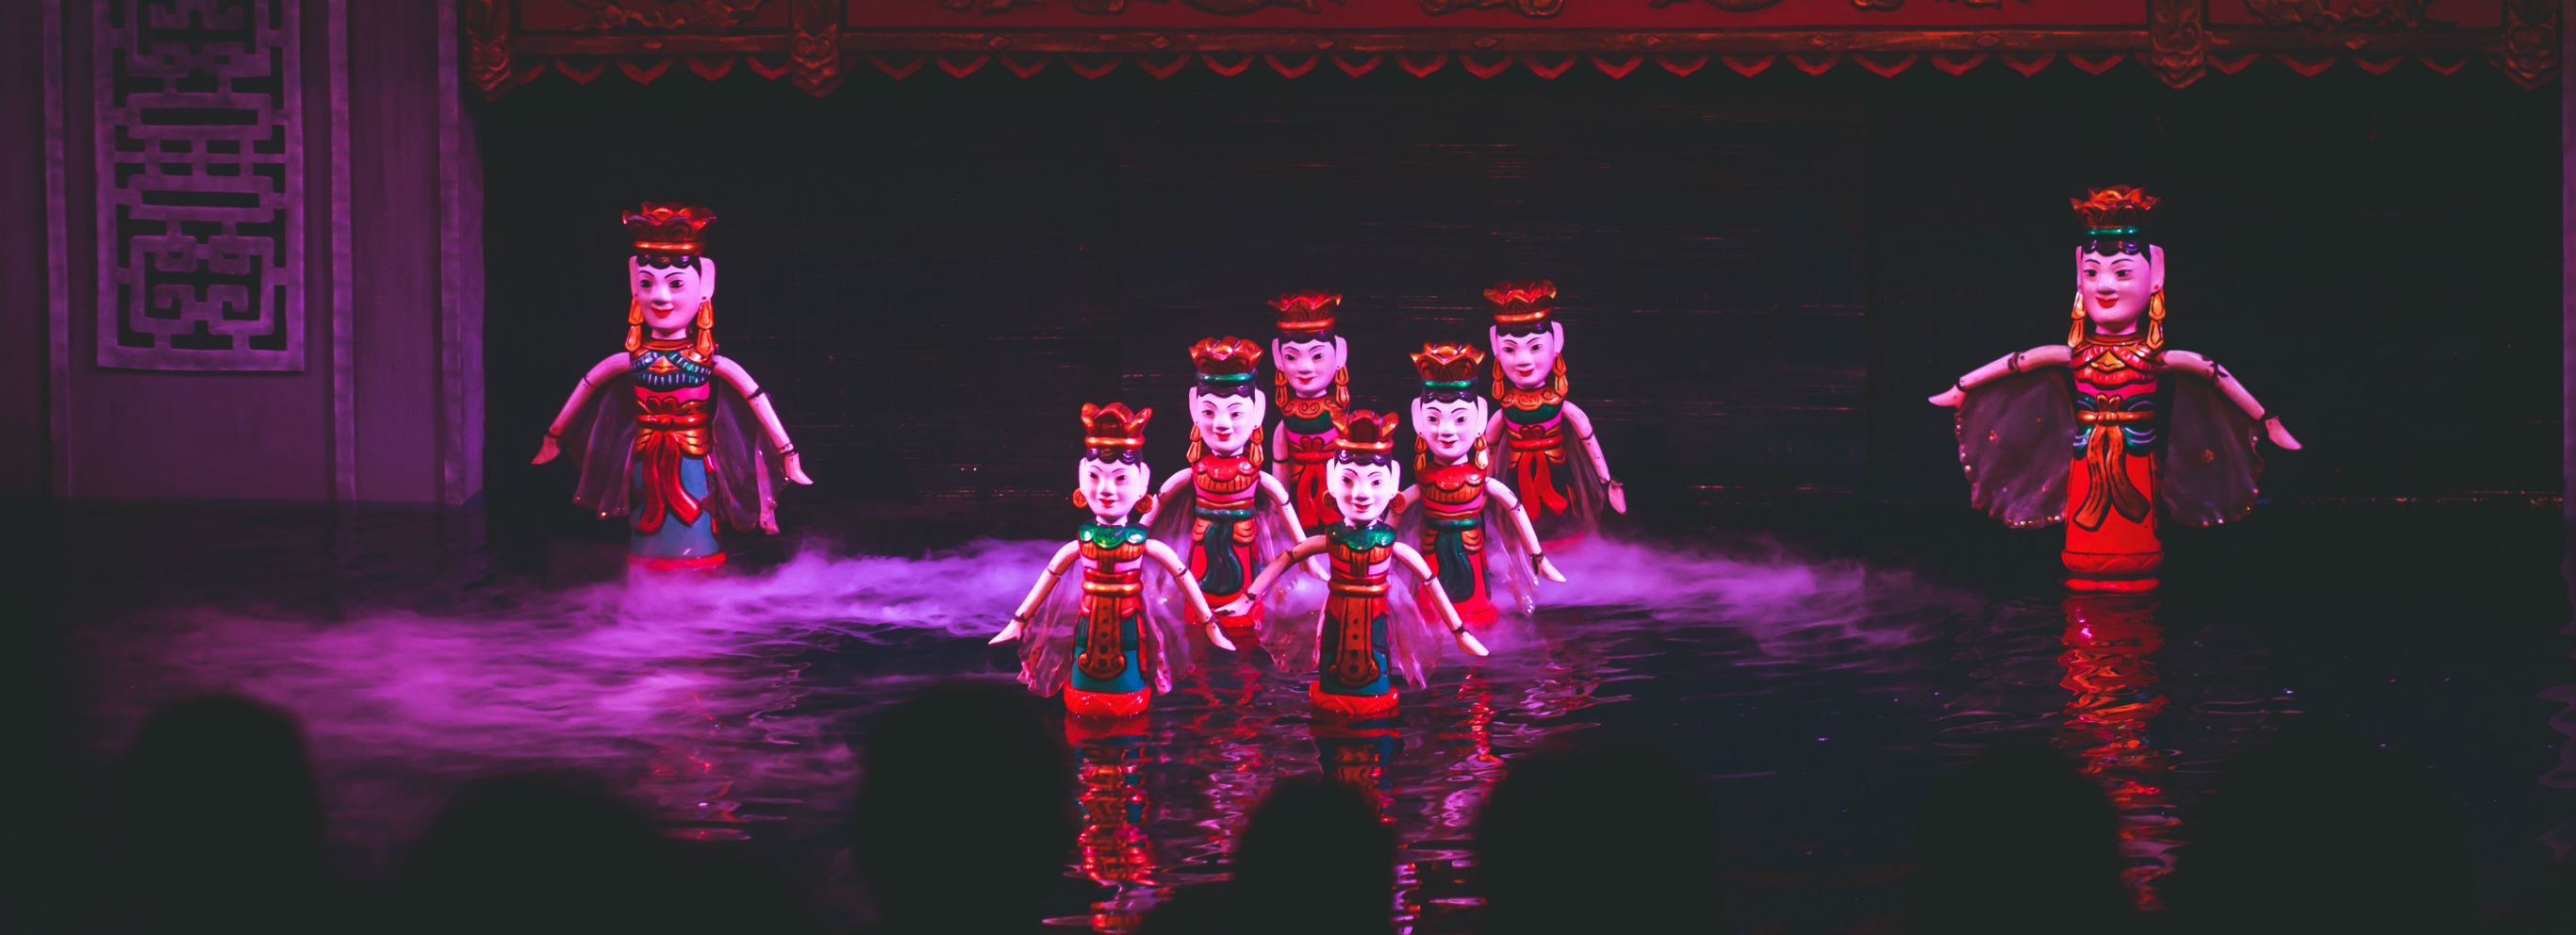 Traditional Vietnamese water puppet